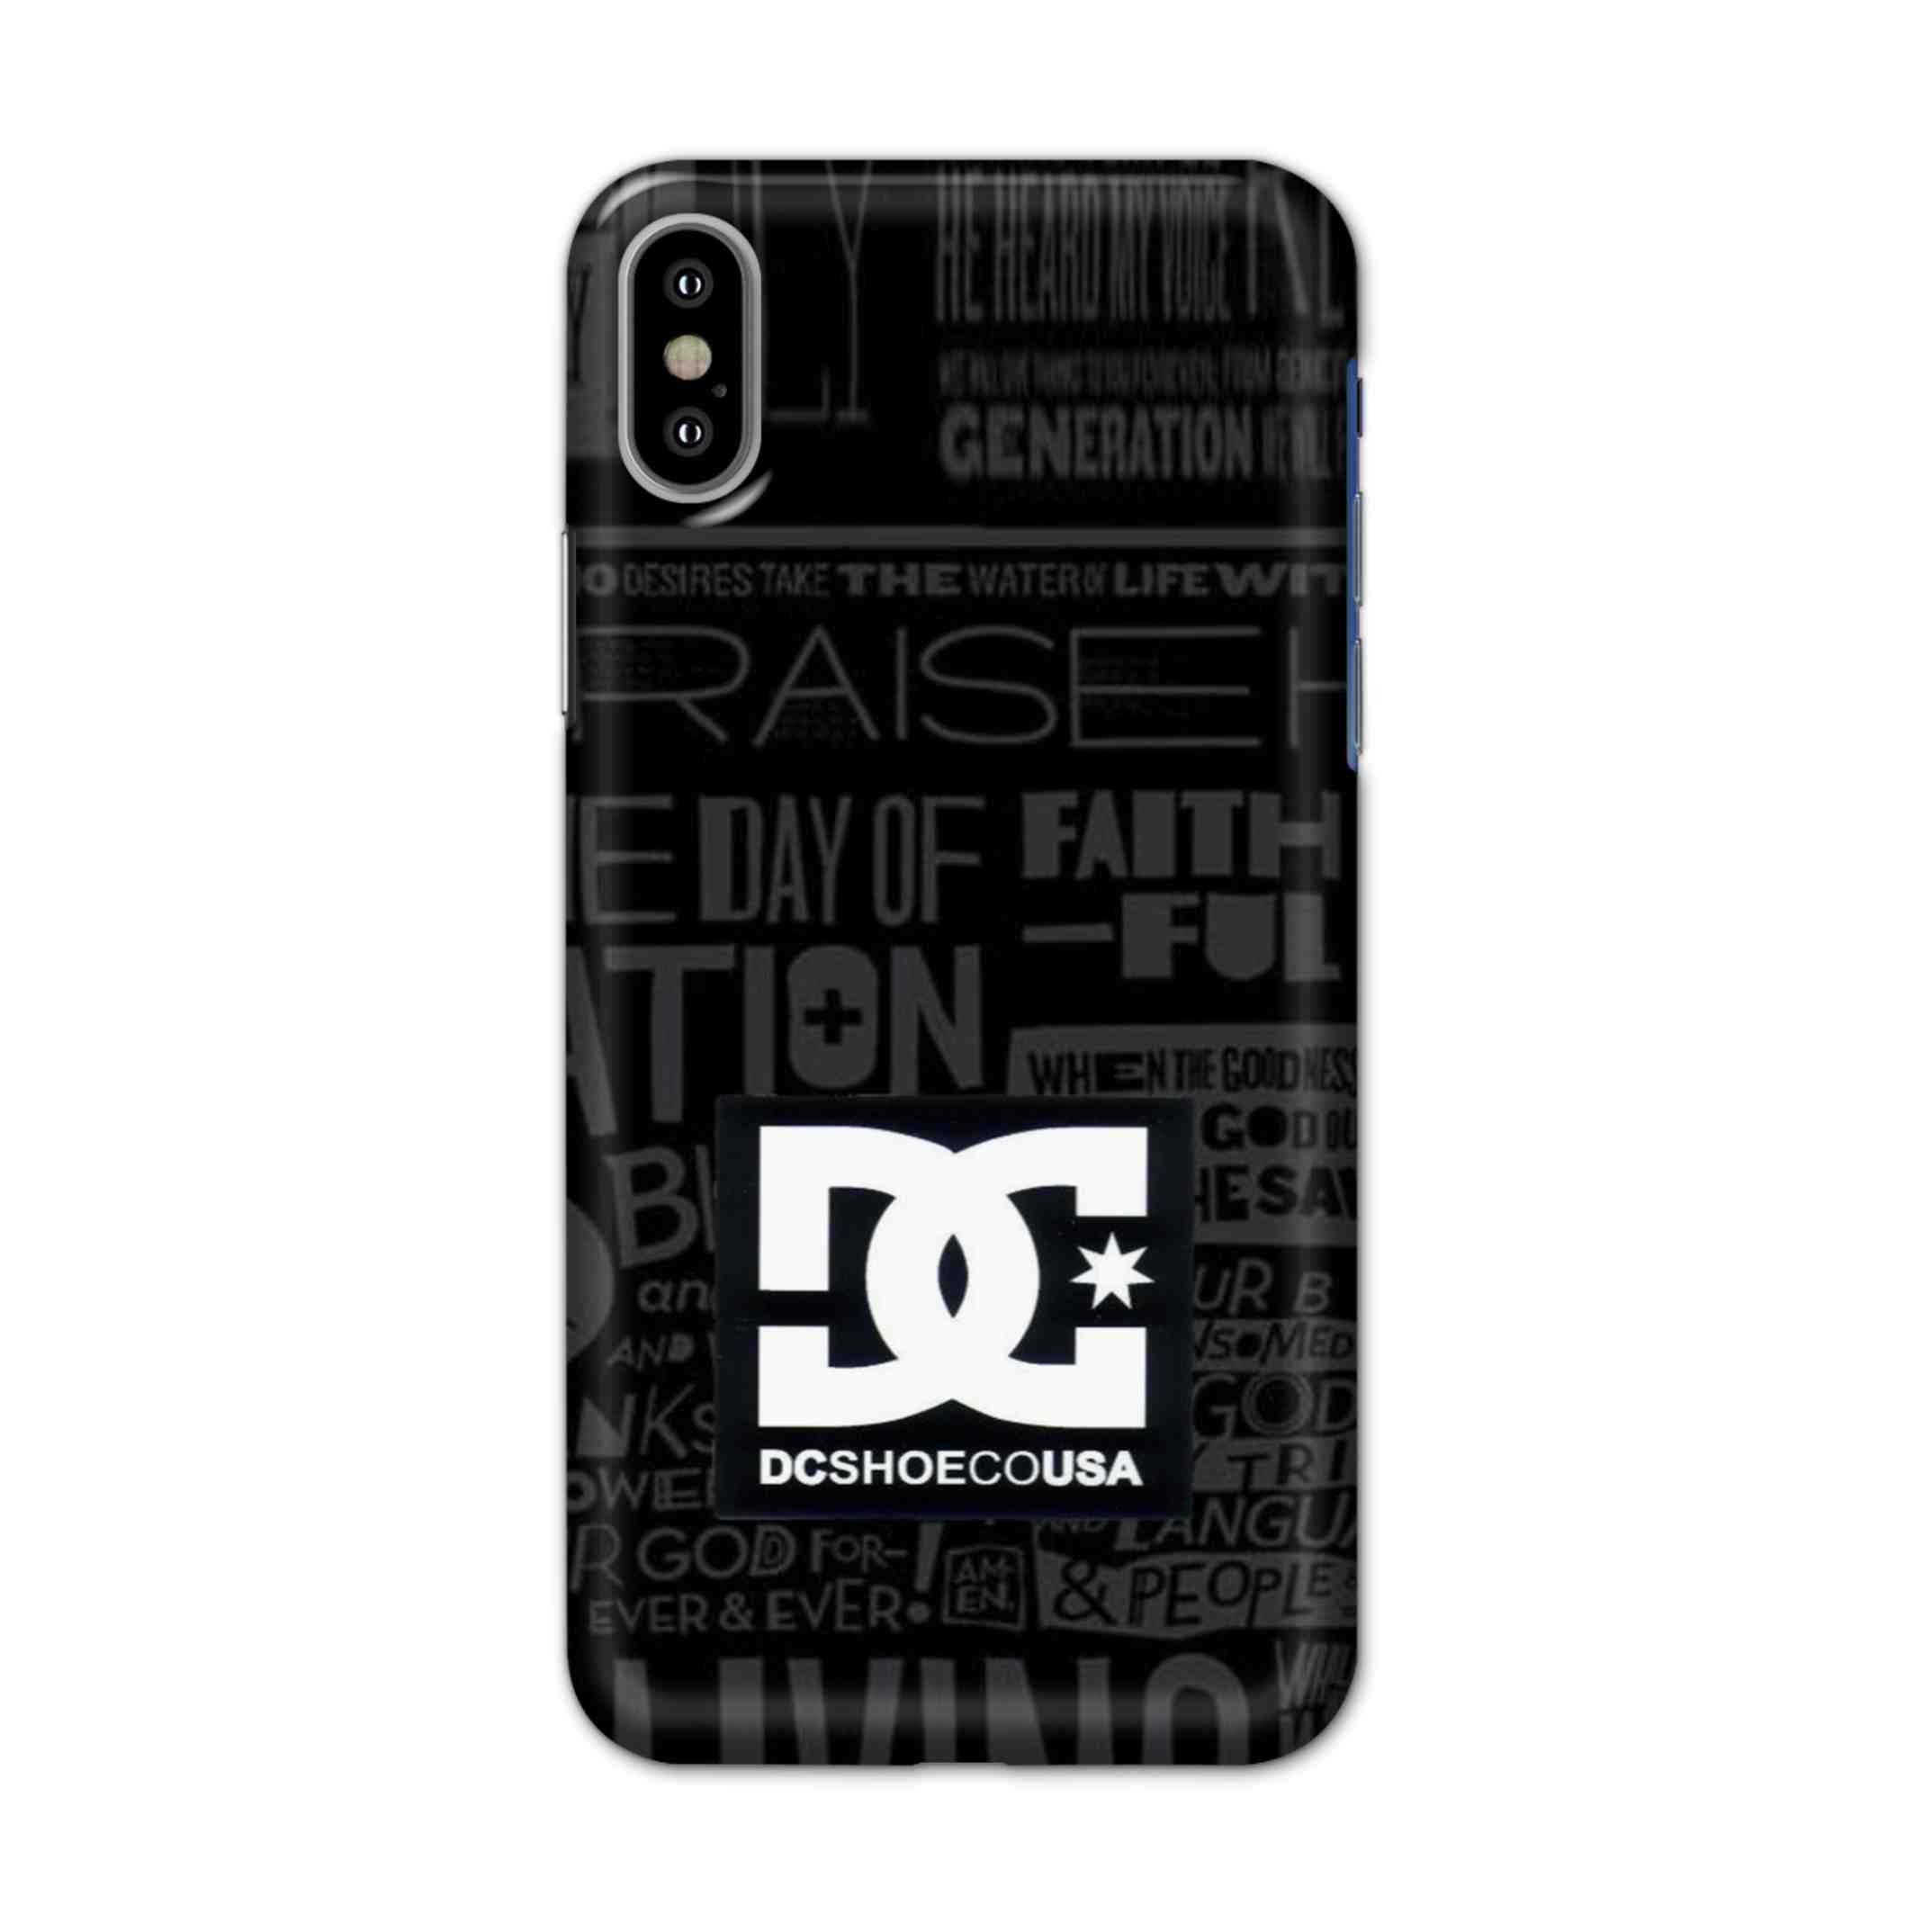 Buy Dc Shoecousa Hard Back Mobile Phone Case/Cover For iPhone X Online